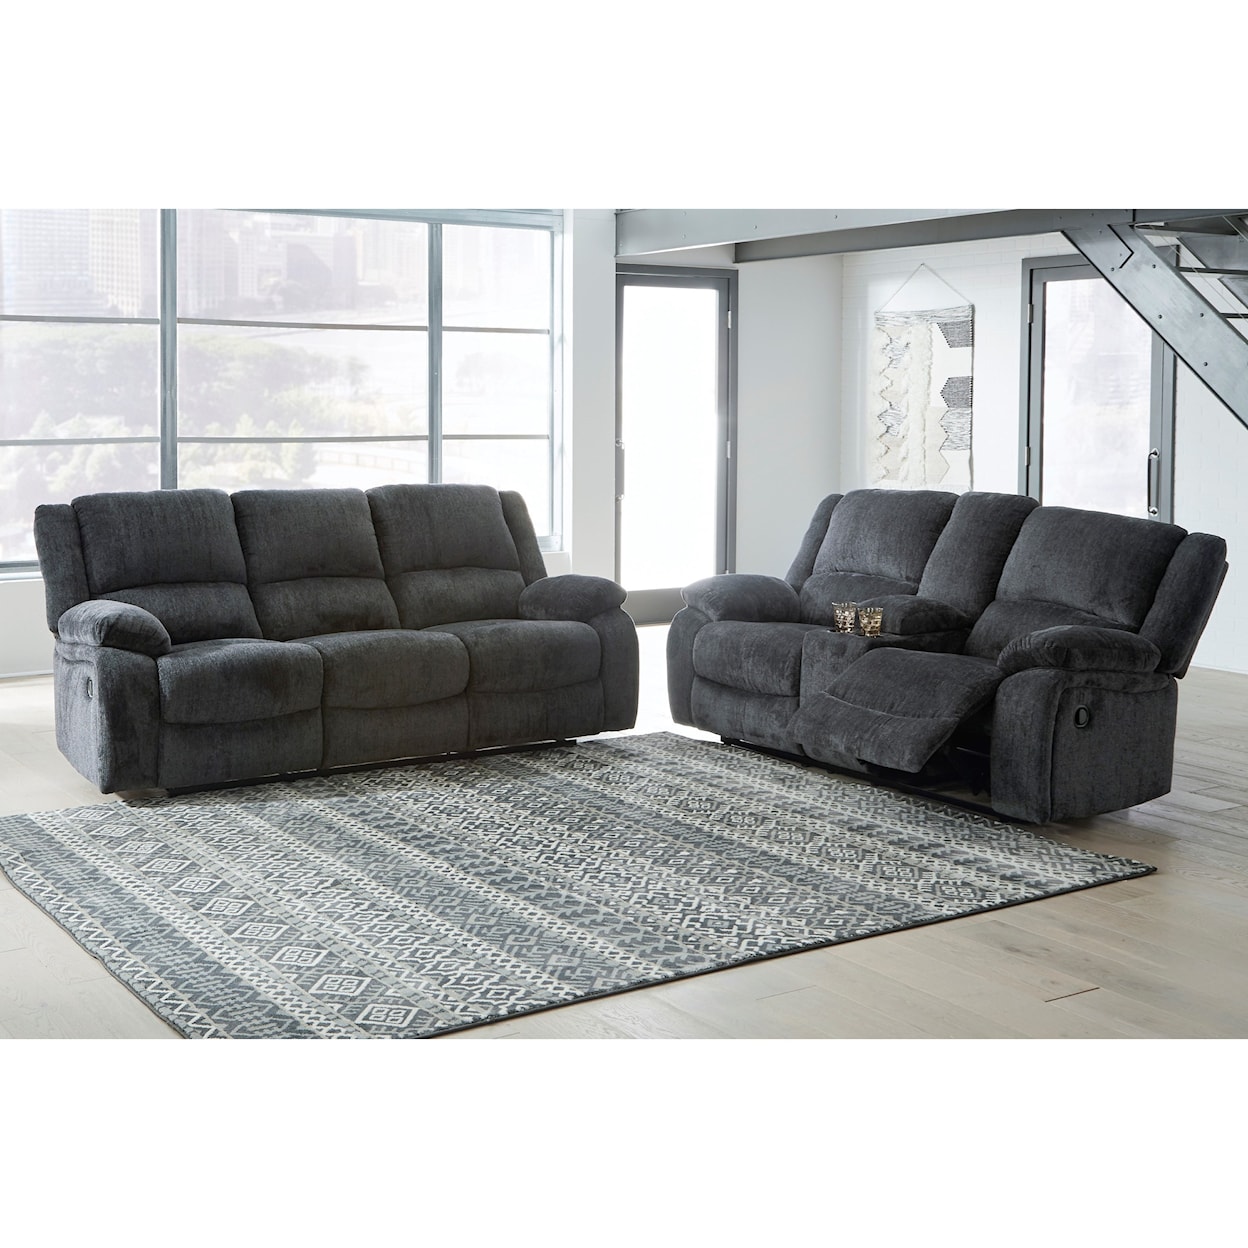 Ashley Furniture Signature Design Draycoll Reclining Living Room Group